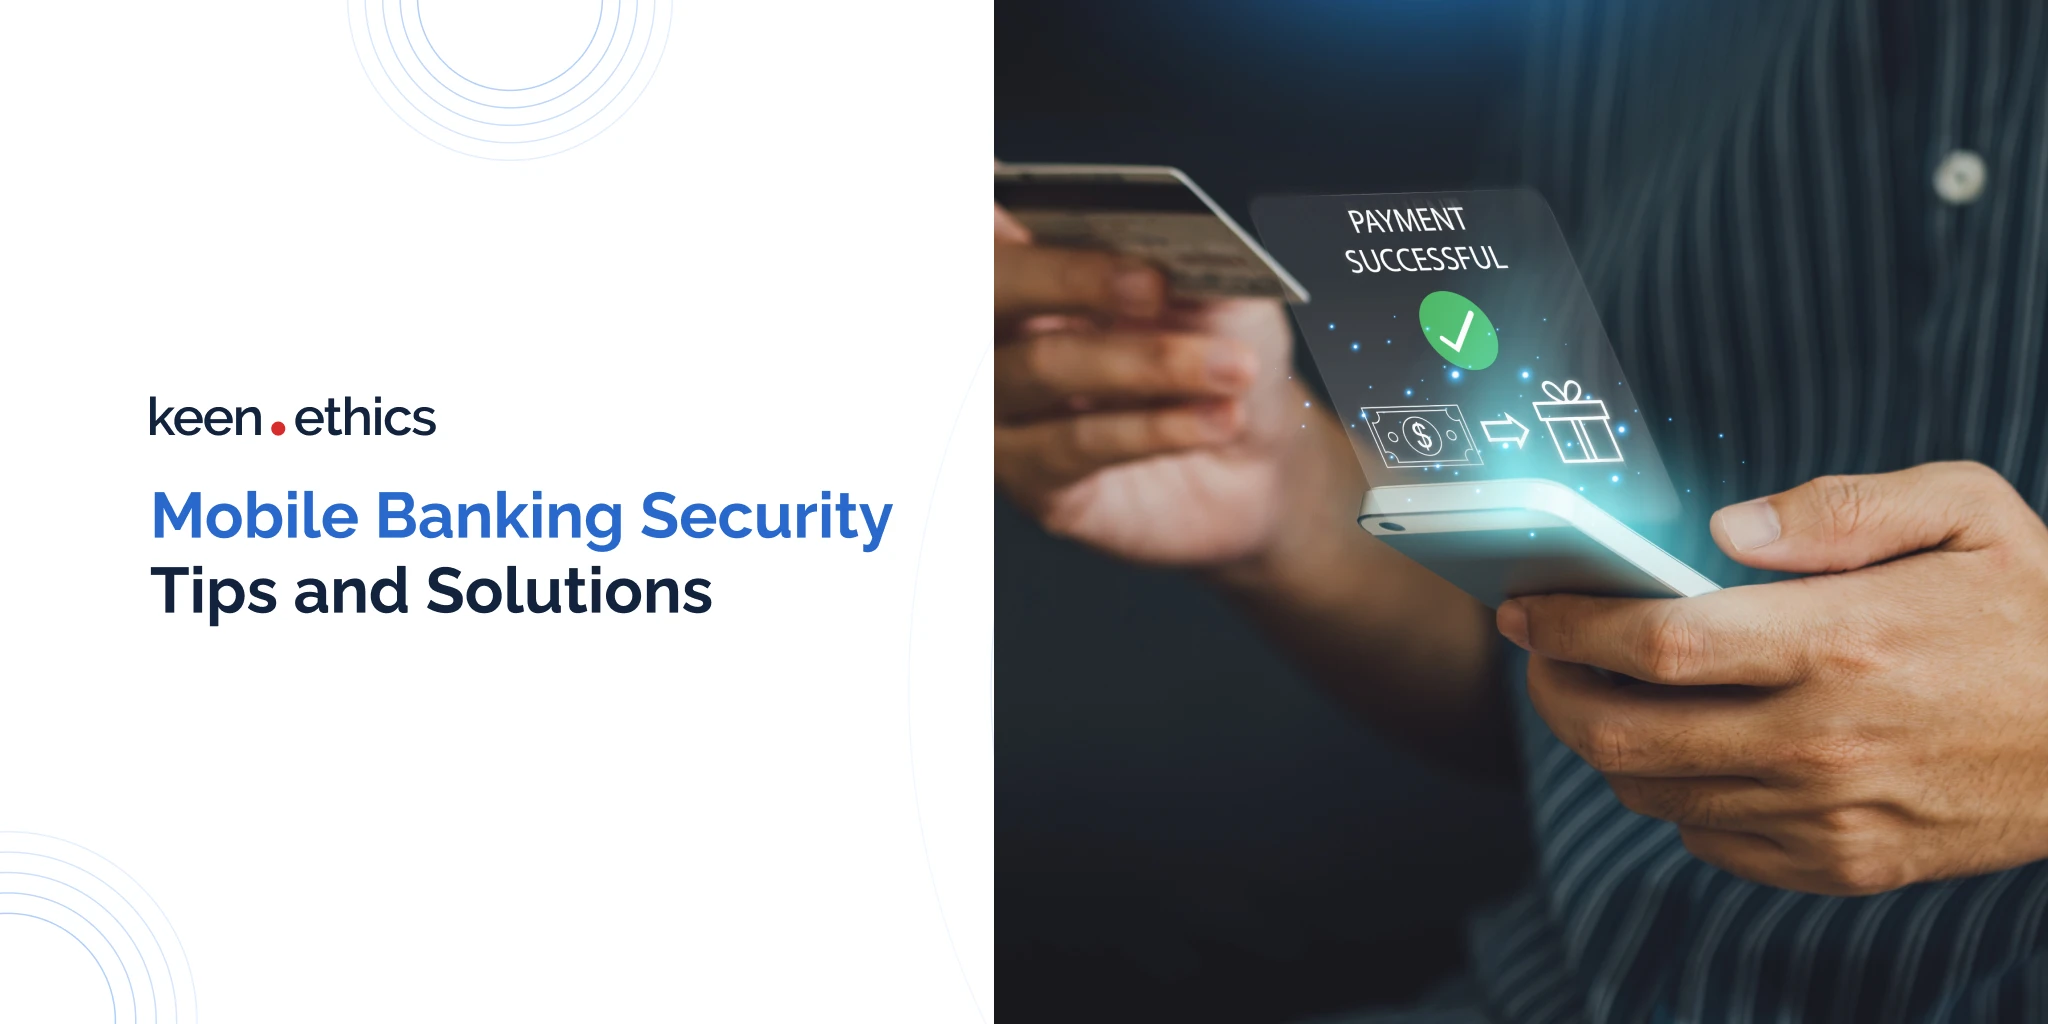 Mobile banking security tips and solutions